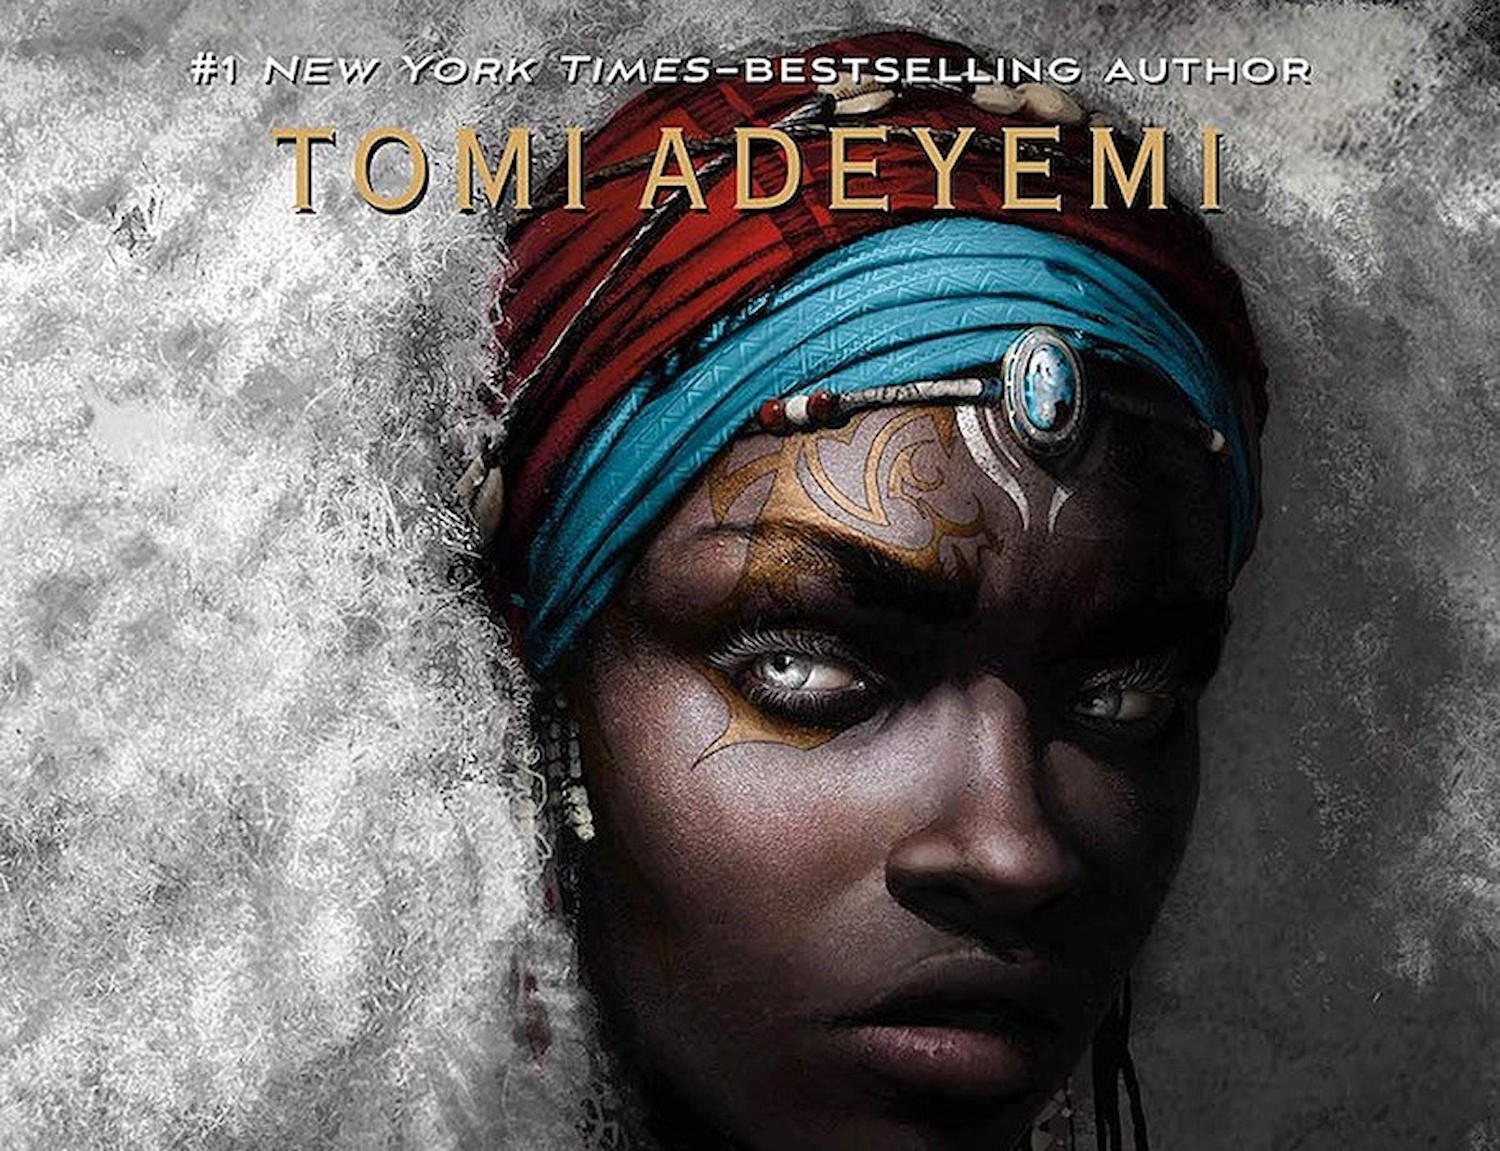 Tomi Adeyemi, Children of Virtue and Vengeance, African American Author, Black Author, African American Childrens Book, Black Childrens Book, African American Literature, Black Literature, KOLUMN Magazine, KOLUMN, KINDR'D Magazine, KINDR'D, Willoughby Avenue, Wriit,